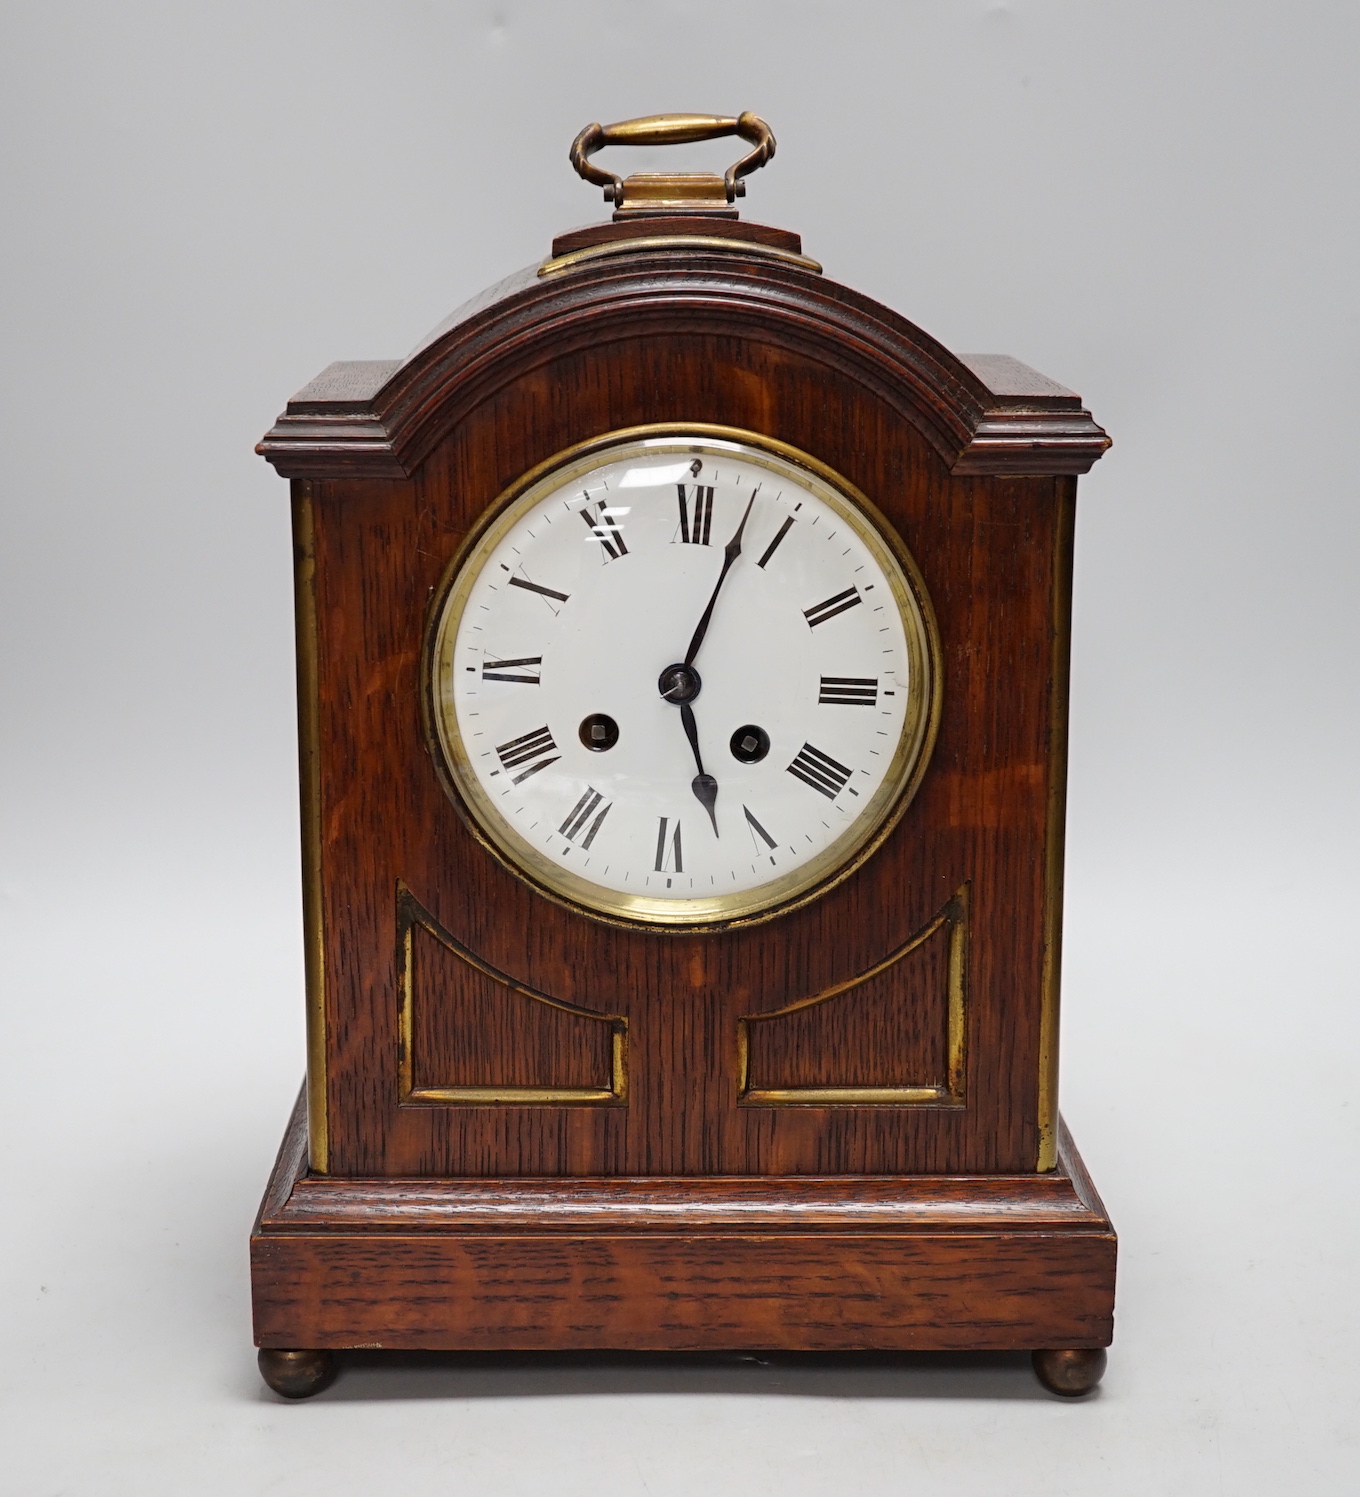 A oak mantel clock in a Regency style with pad top, striking on a coiled gong, 30cm high